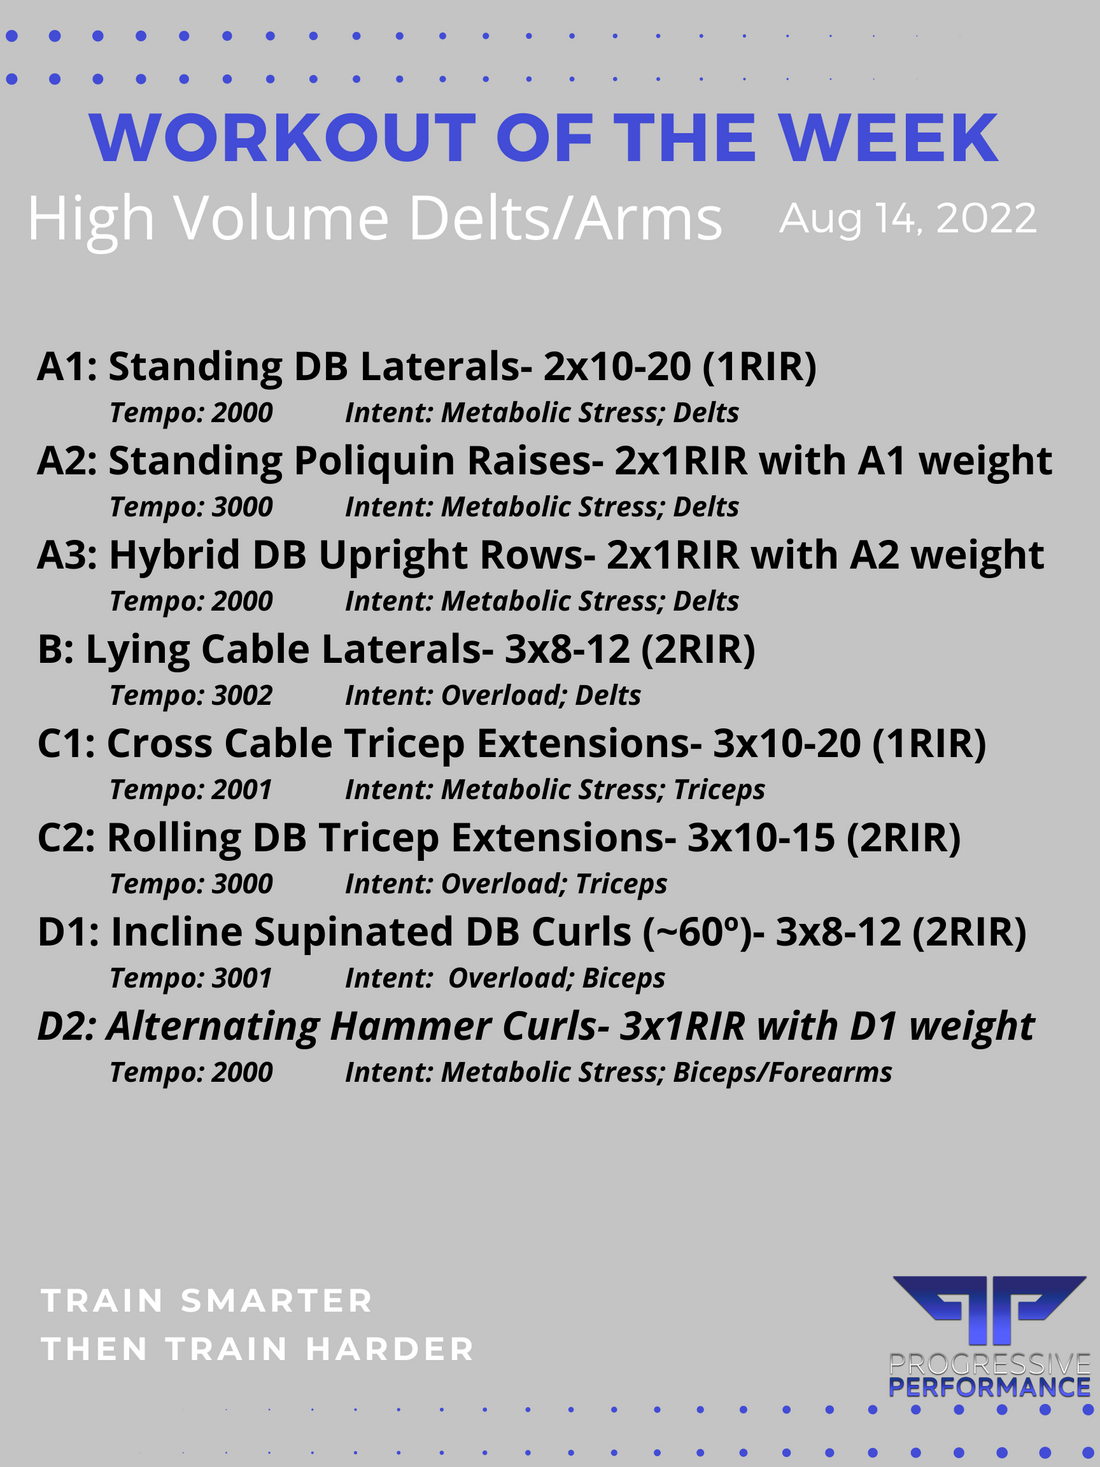 High Volume Delts and Arms